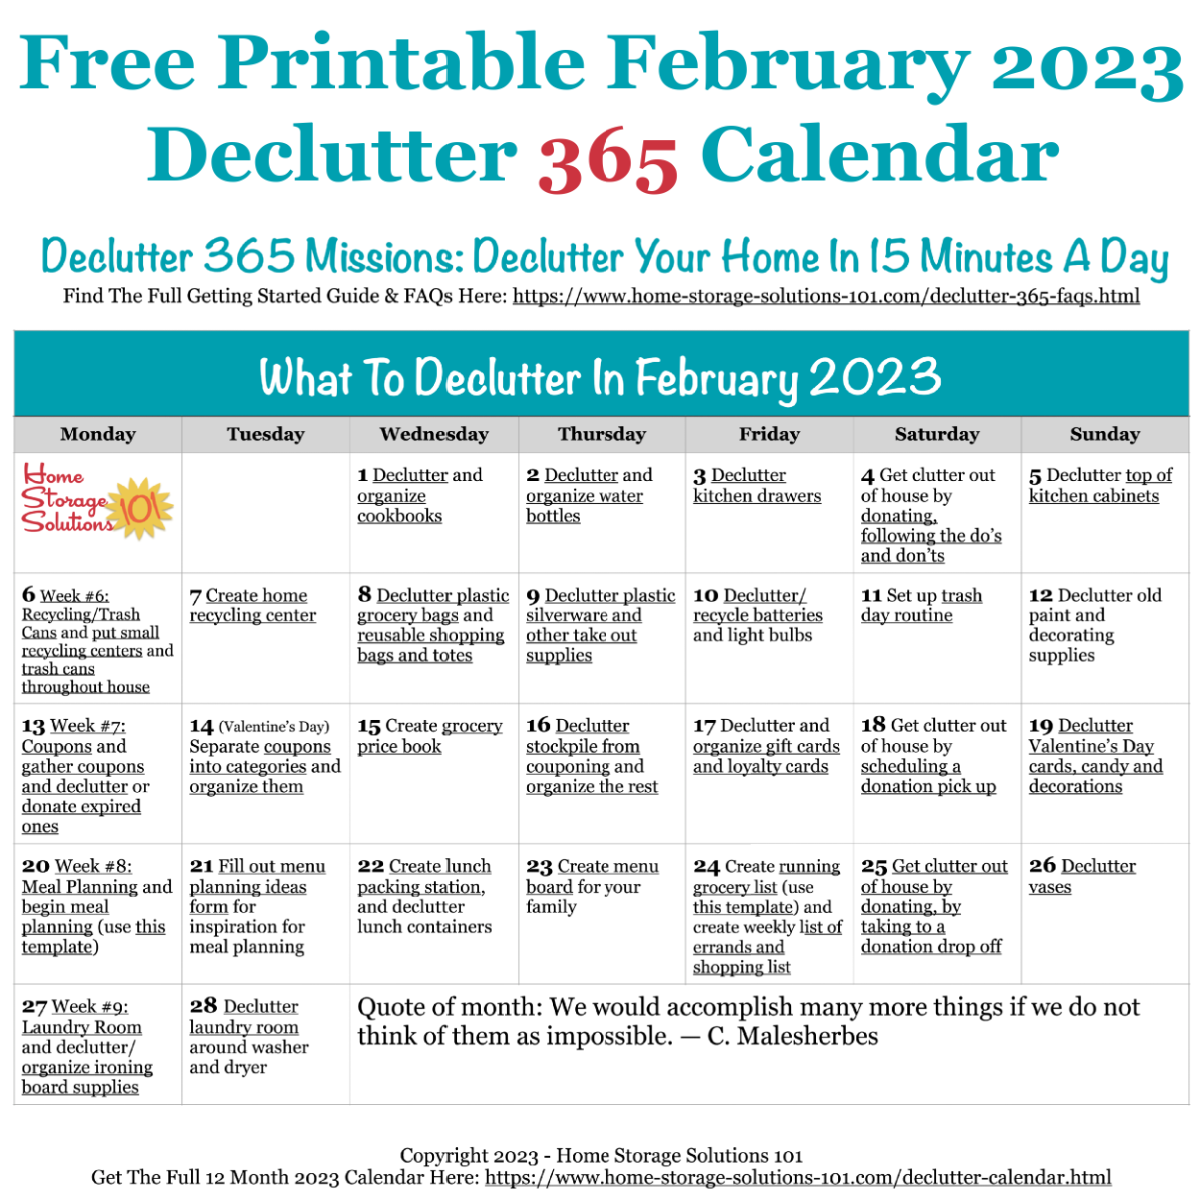 Free printable February 2023 #decluttering calendar with daily 15 minute missions. Follow the entire #Declutter365 plan provided by Home Storage Solutions 101 to #declutter your whole house in a year.